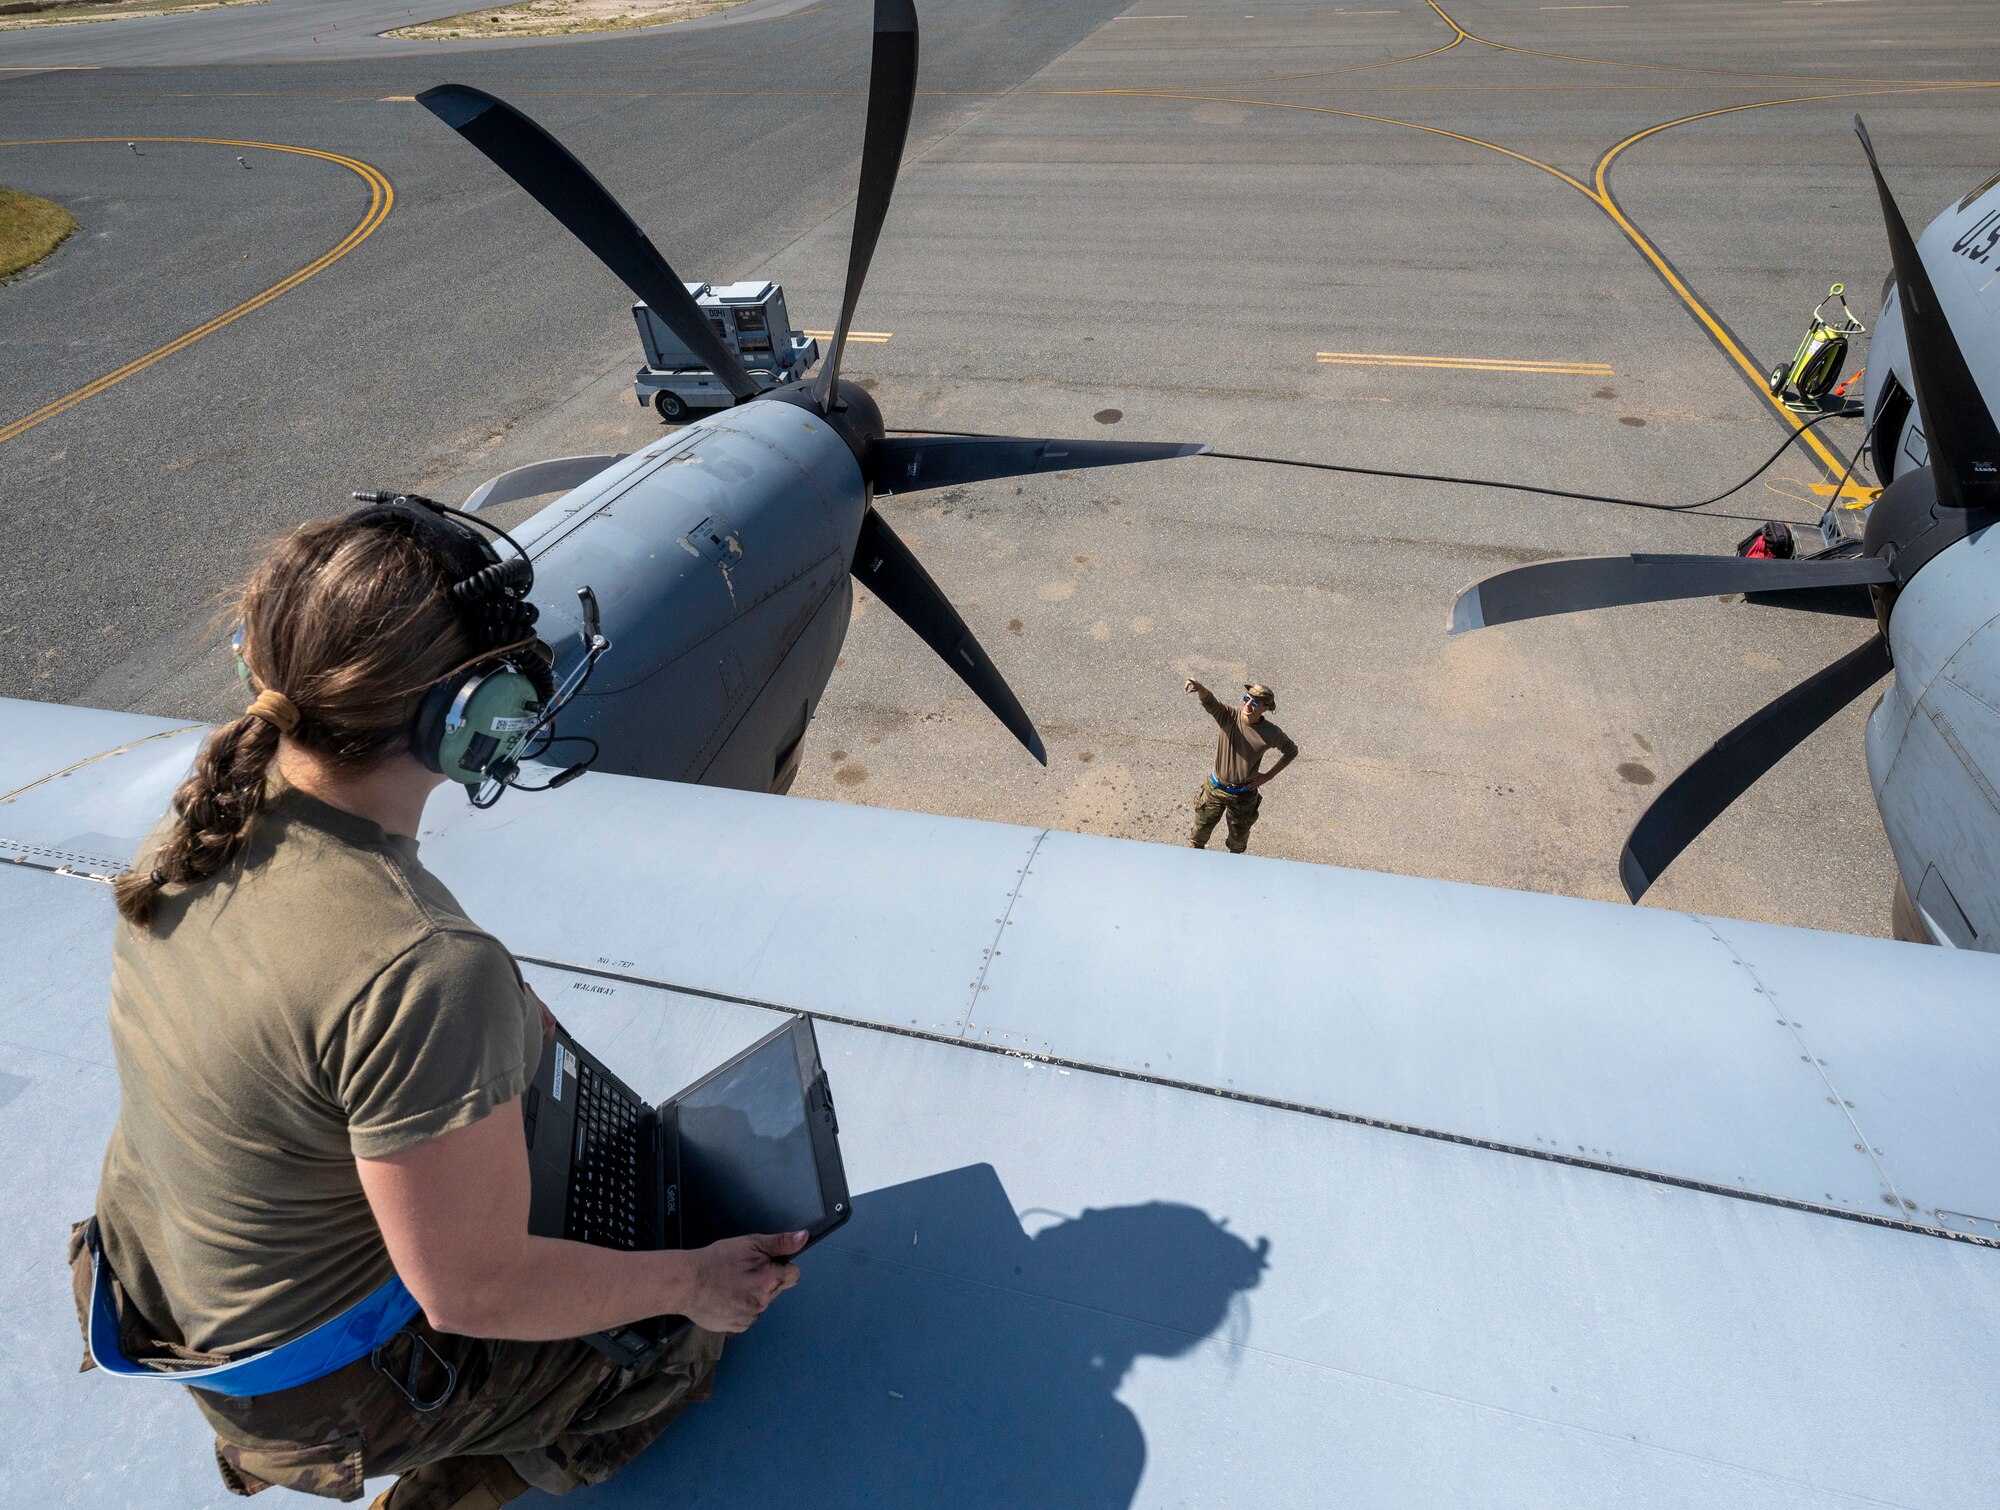 U.S. Air Force Senior Airman Tyler Horschel and Airman Taylor Howard, 386th Expeditionary Aircraft Maintenance Squadron crew chiefs, inspect the wing of a C-130J Super Hercules at Ali Al Salem Air Base, Kuwait, March 22, 2023.